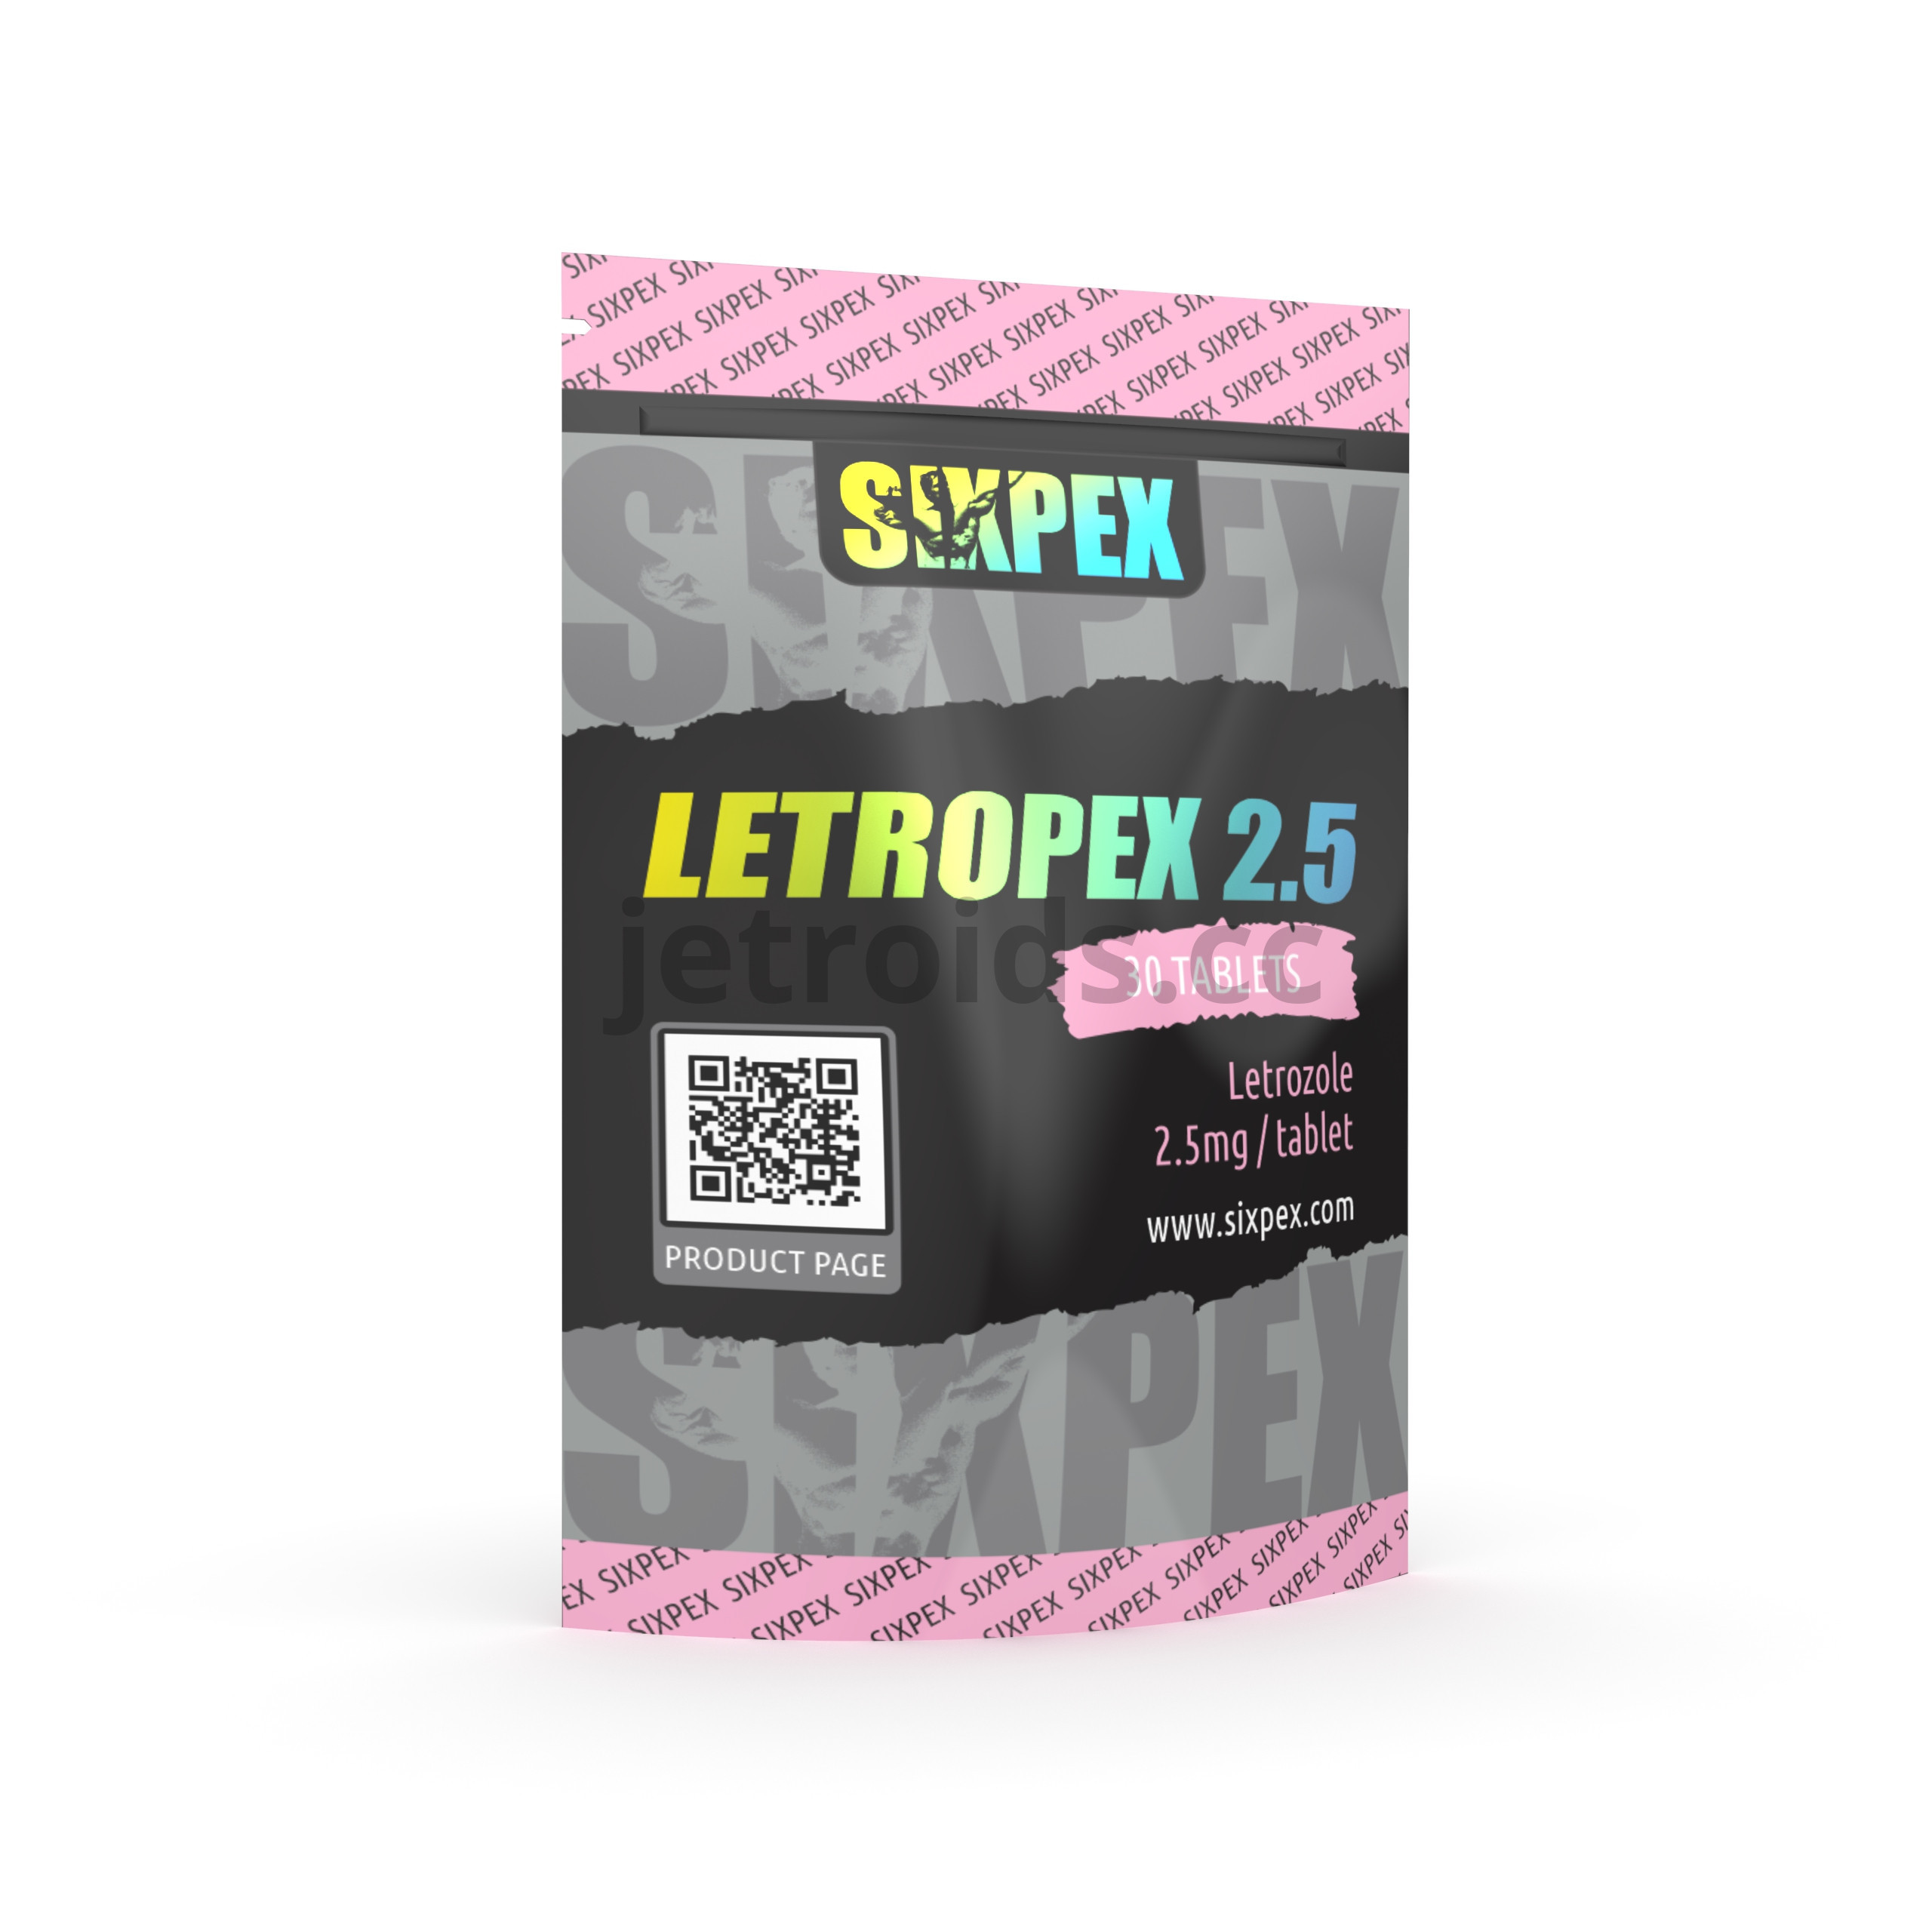 Sixpex Letropex 2.5 Product Info